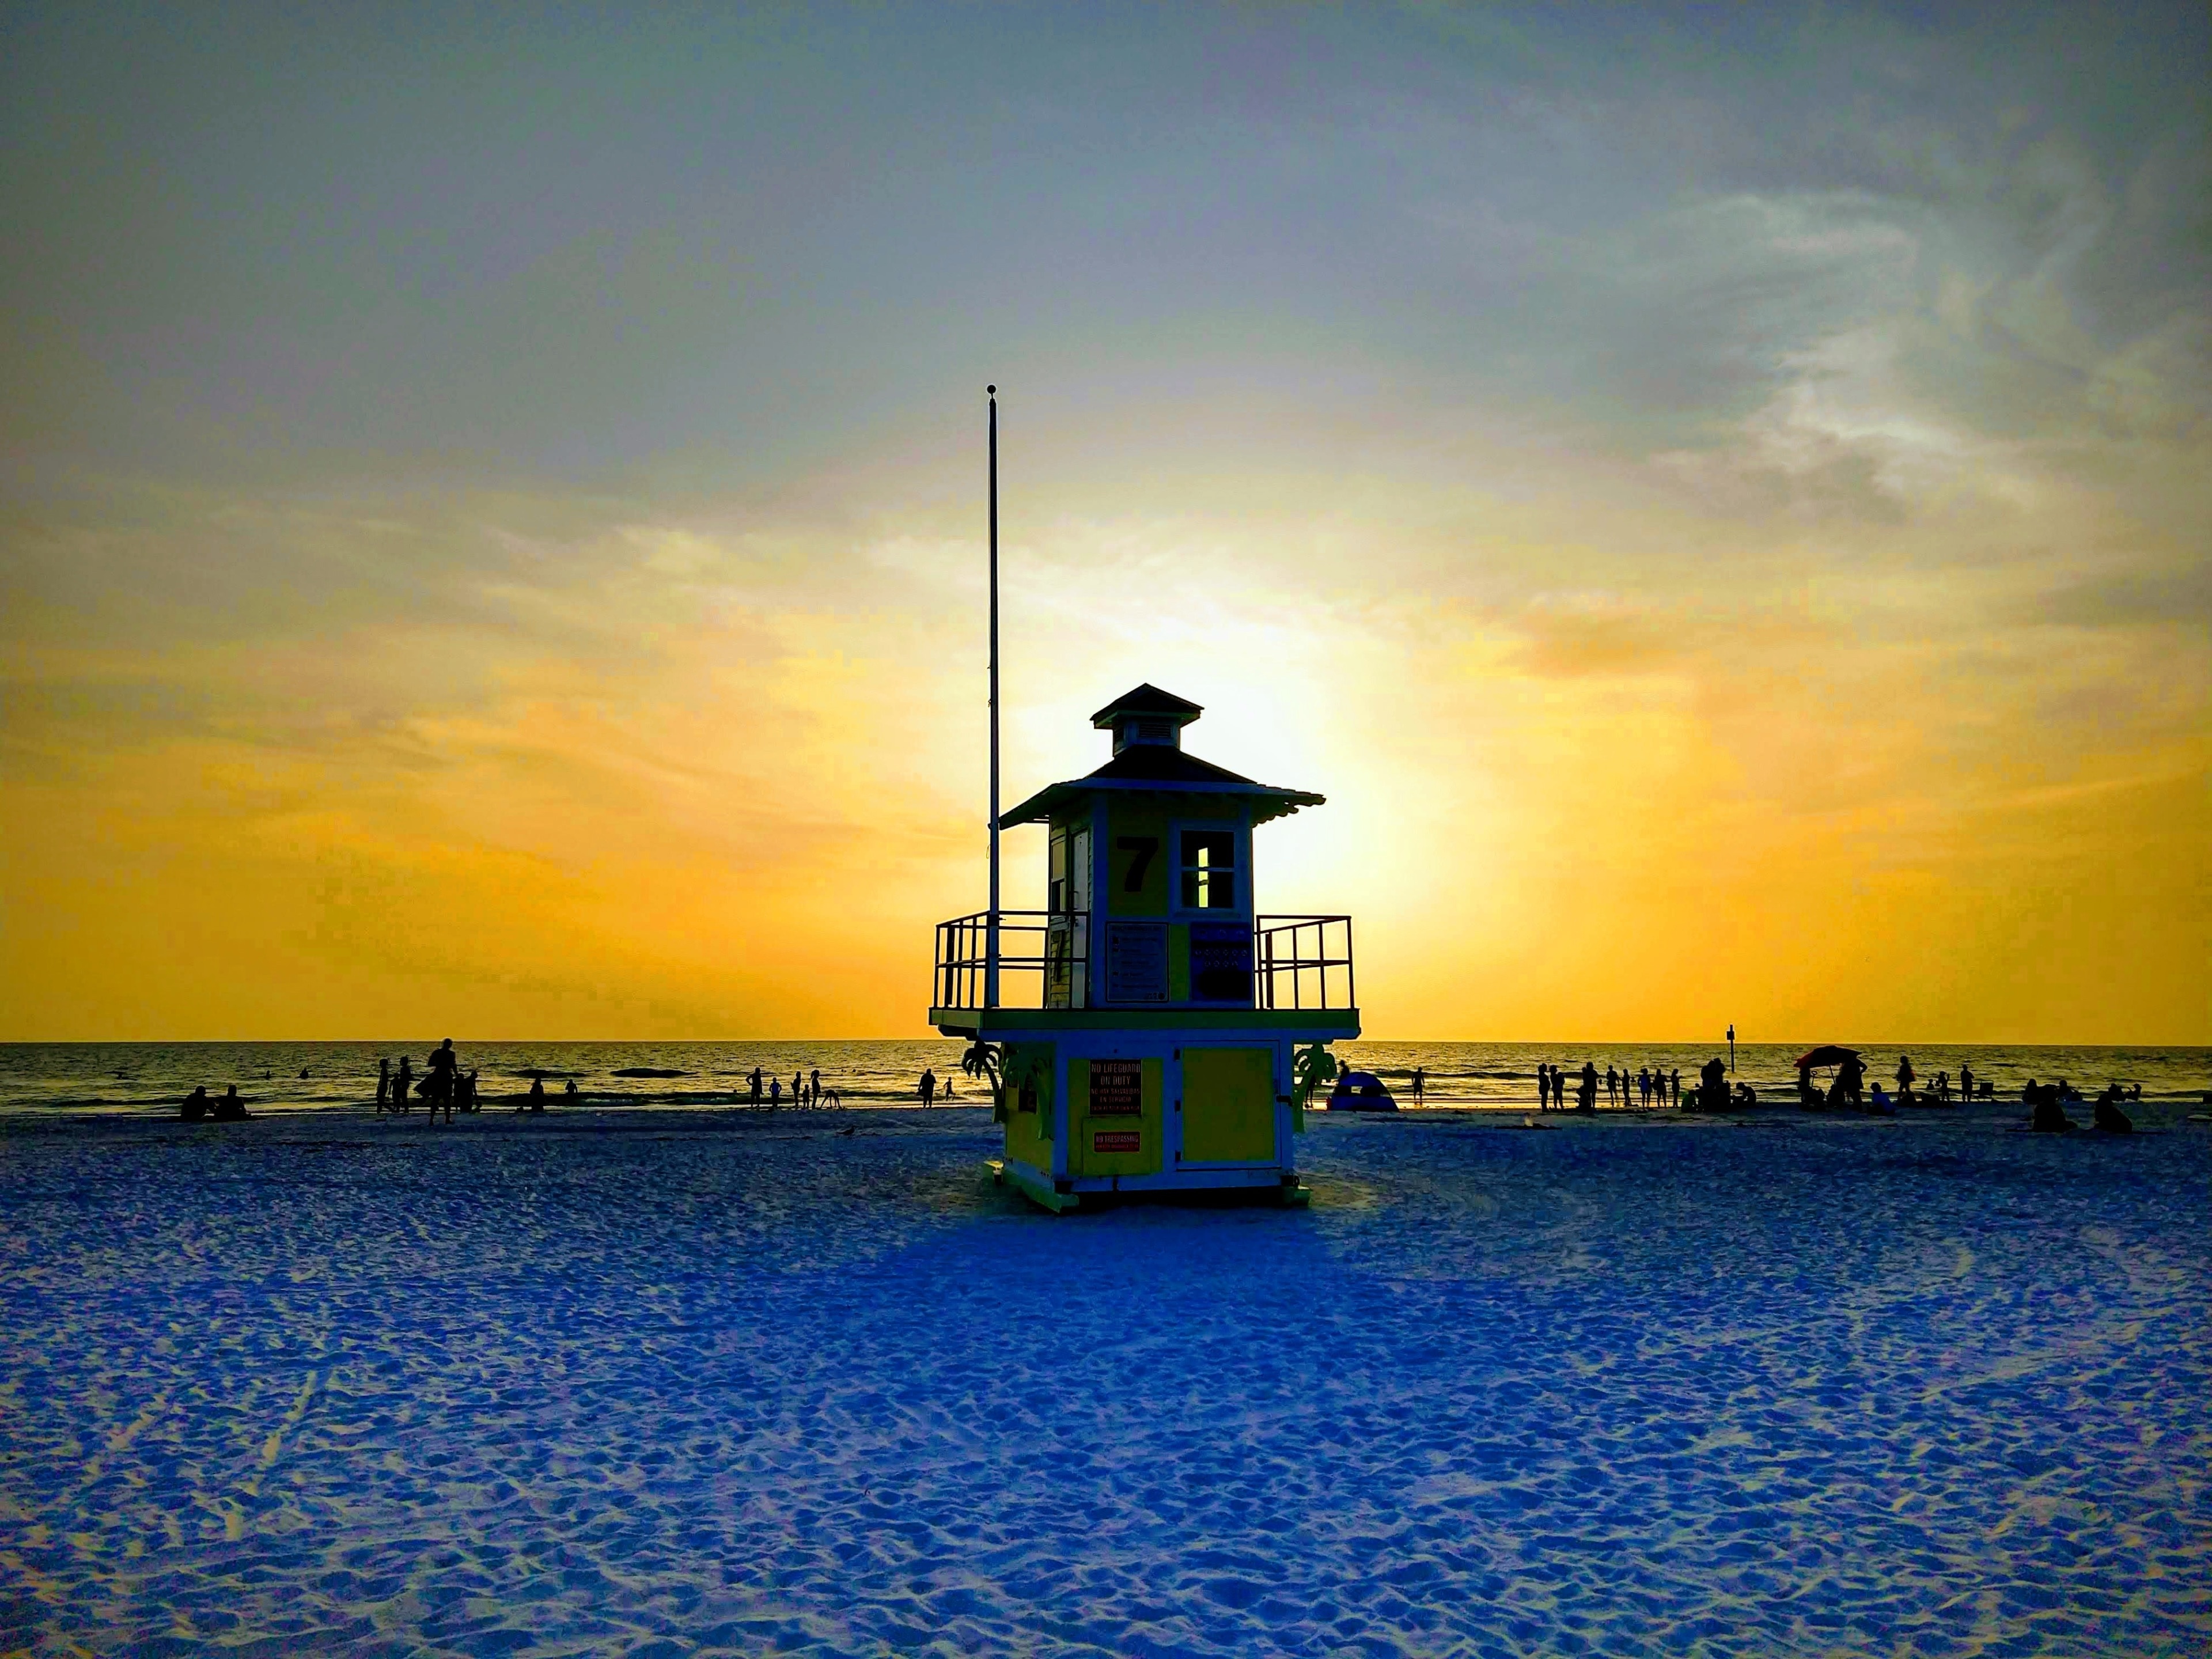 The sunset behind the lifeguard tower in combination with a bit of filtering made this image quite unique. #LifeAtExpedia